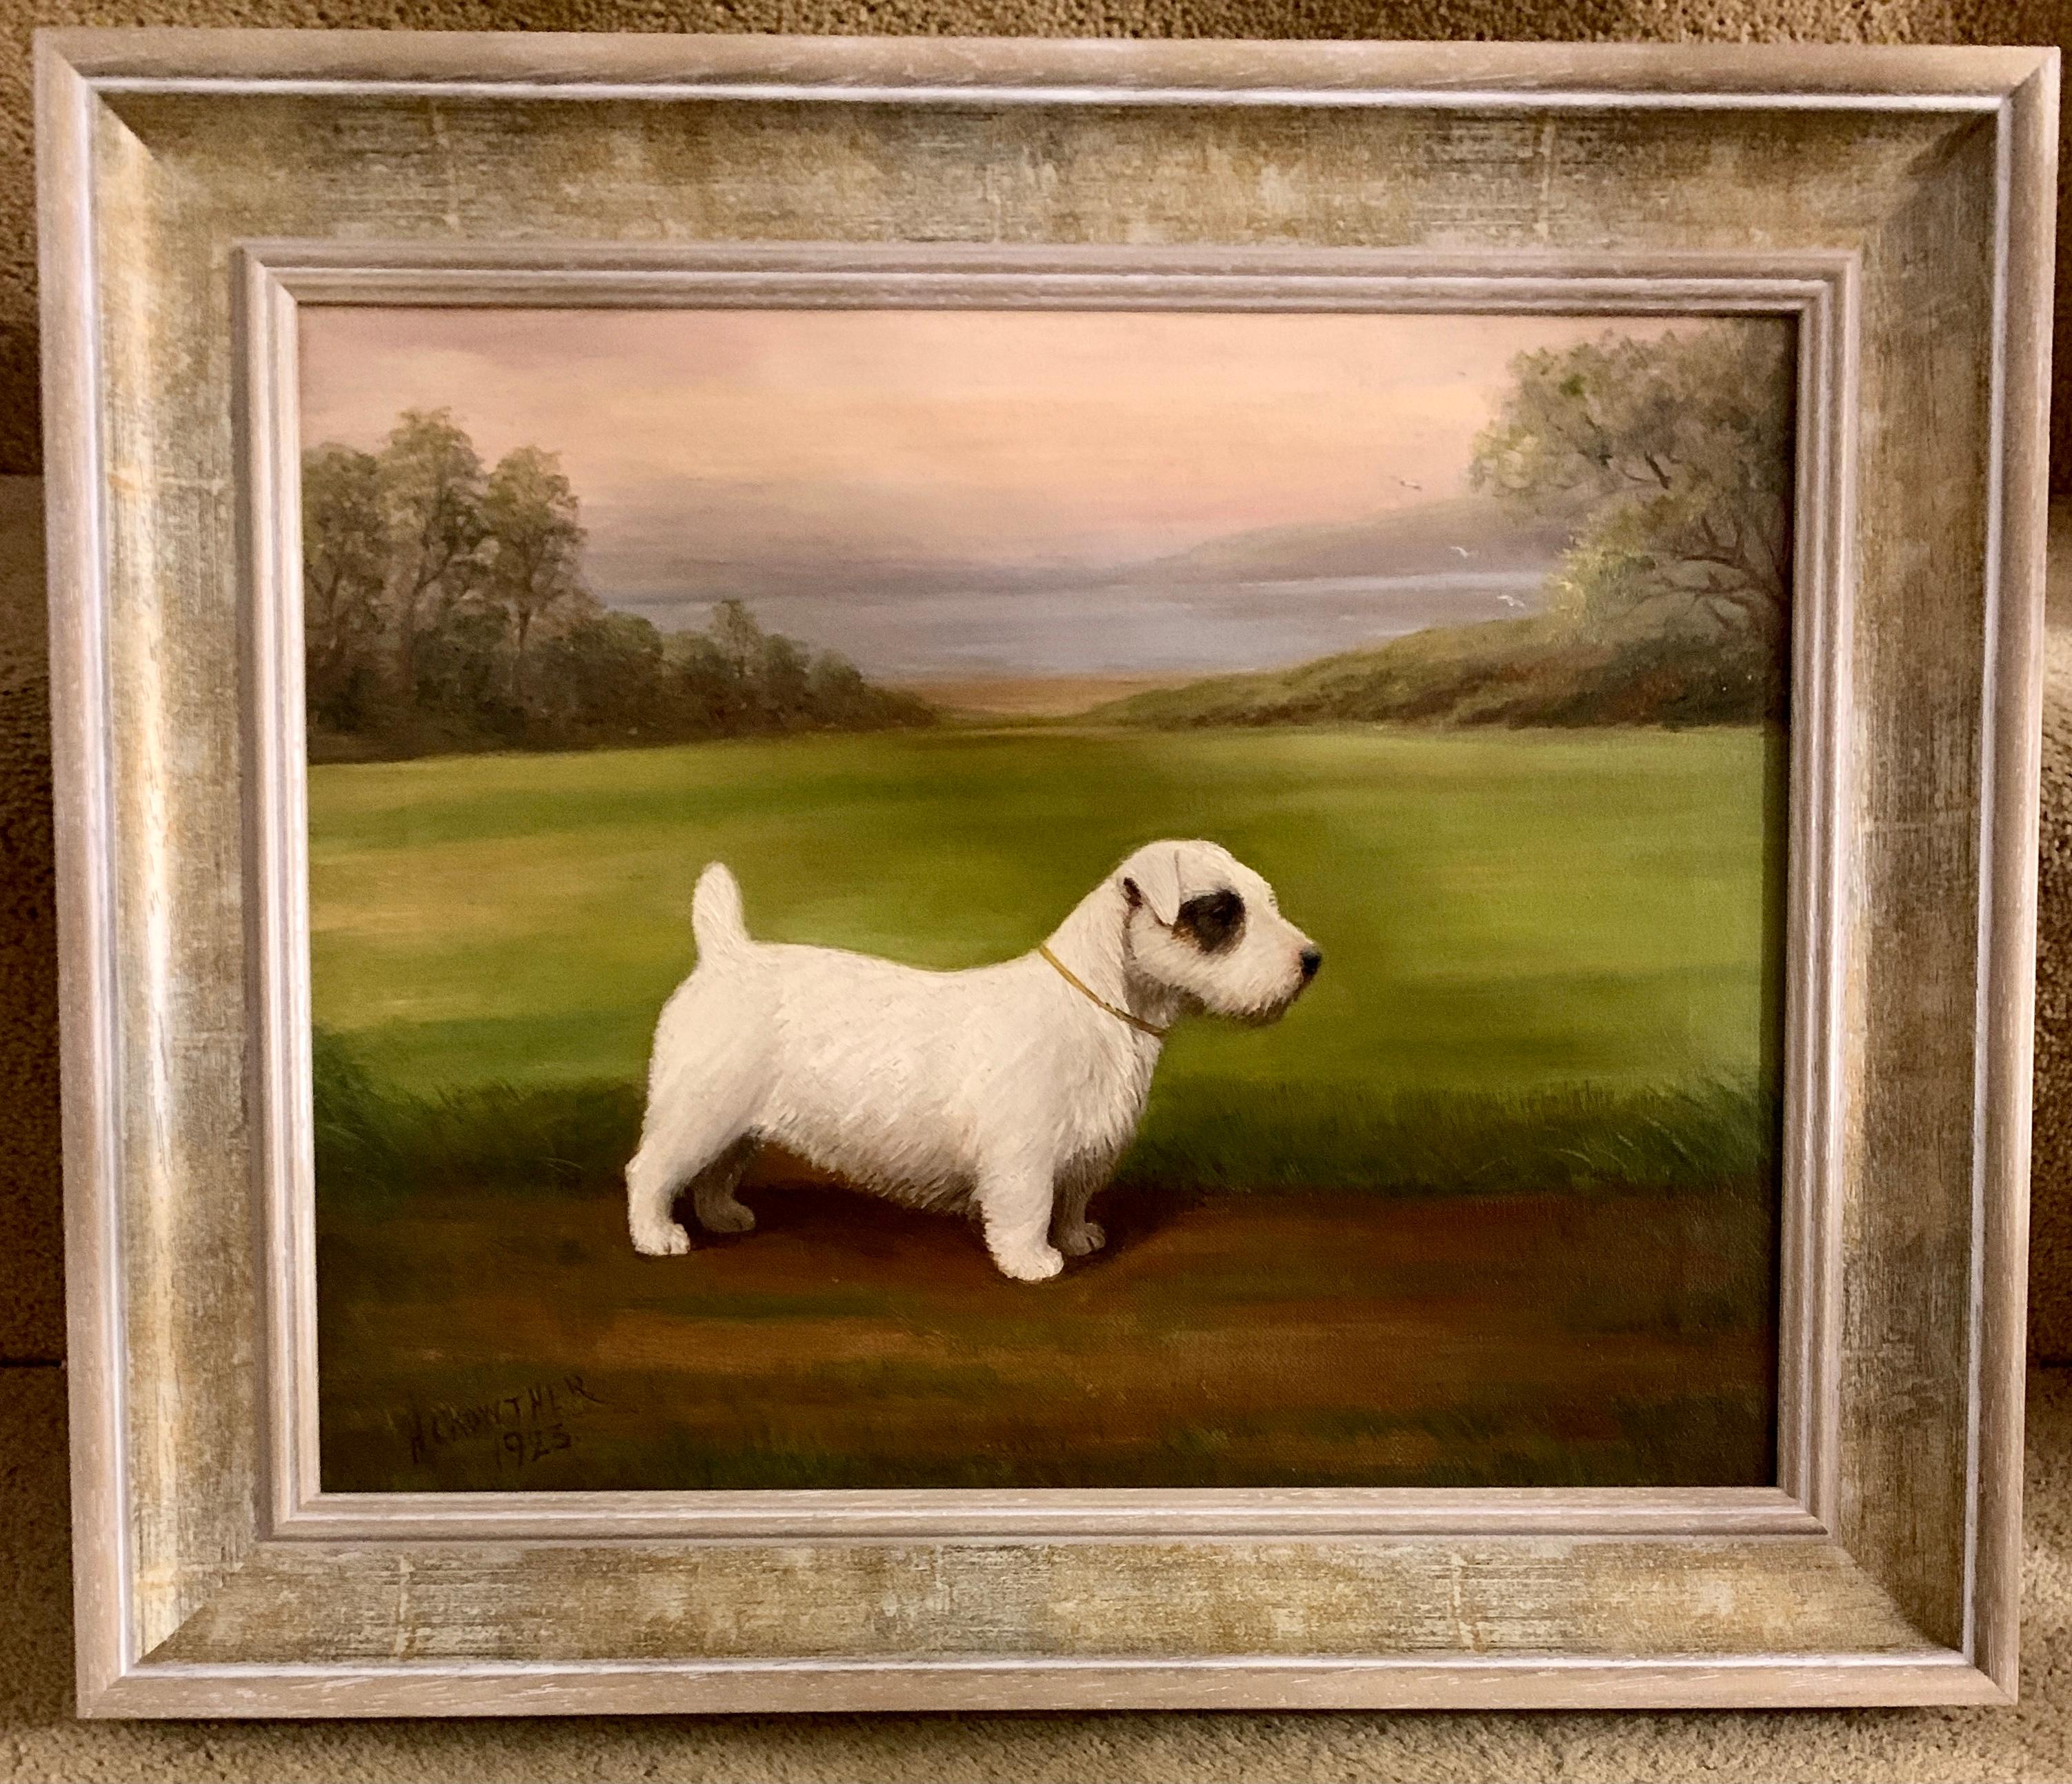 English early 20th century portrait of a Sealyham terrier in a landscape